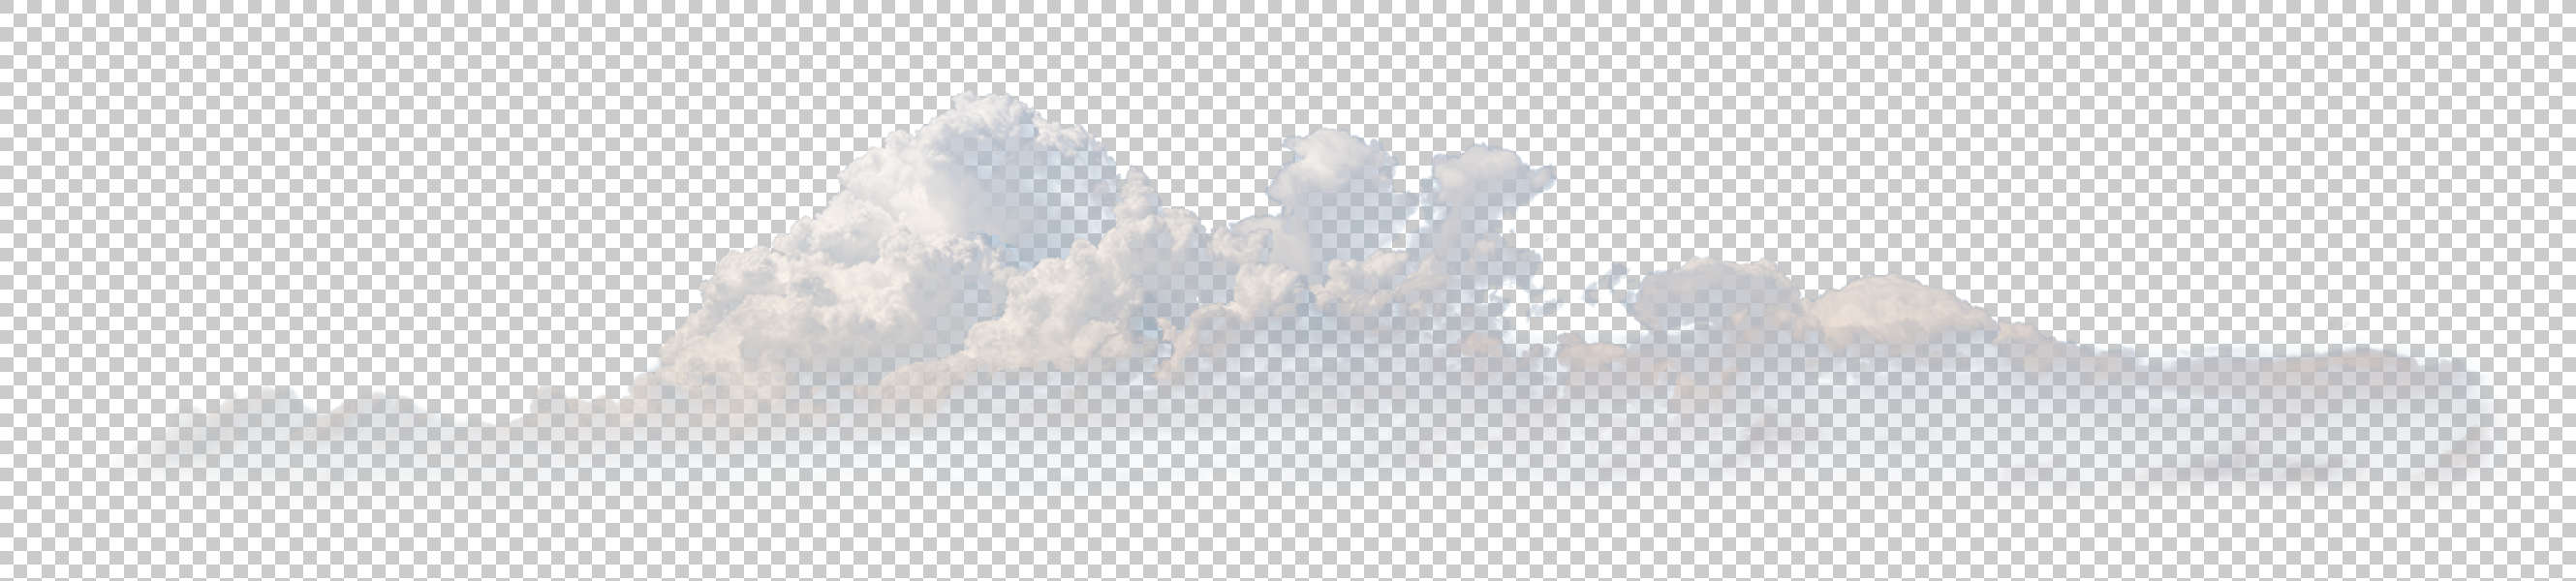 Skies0366 - Free Background Texture - sky clouds cloudy blue cumulus